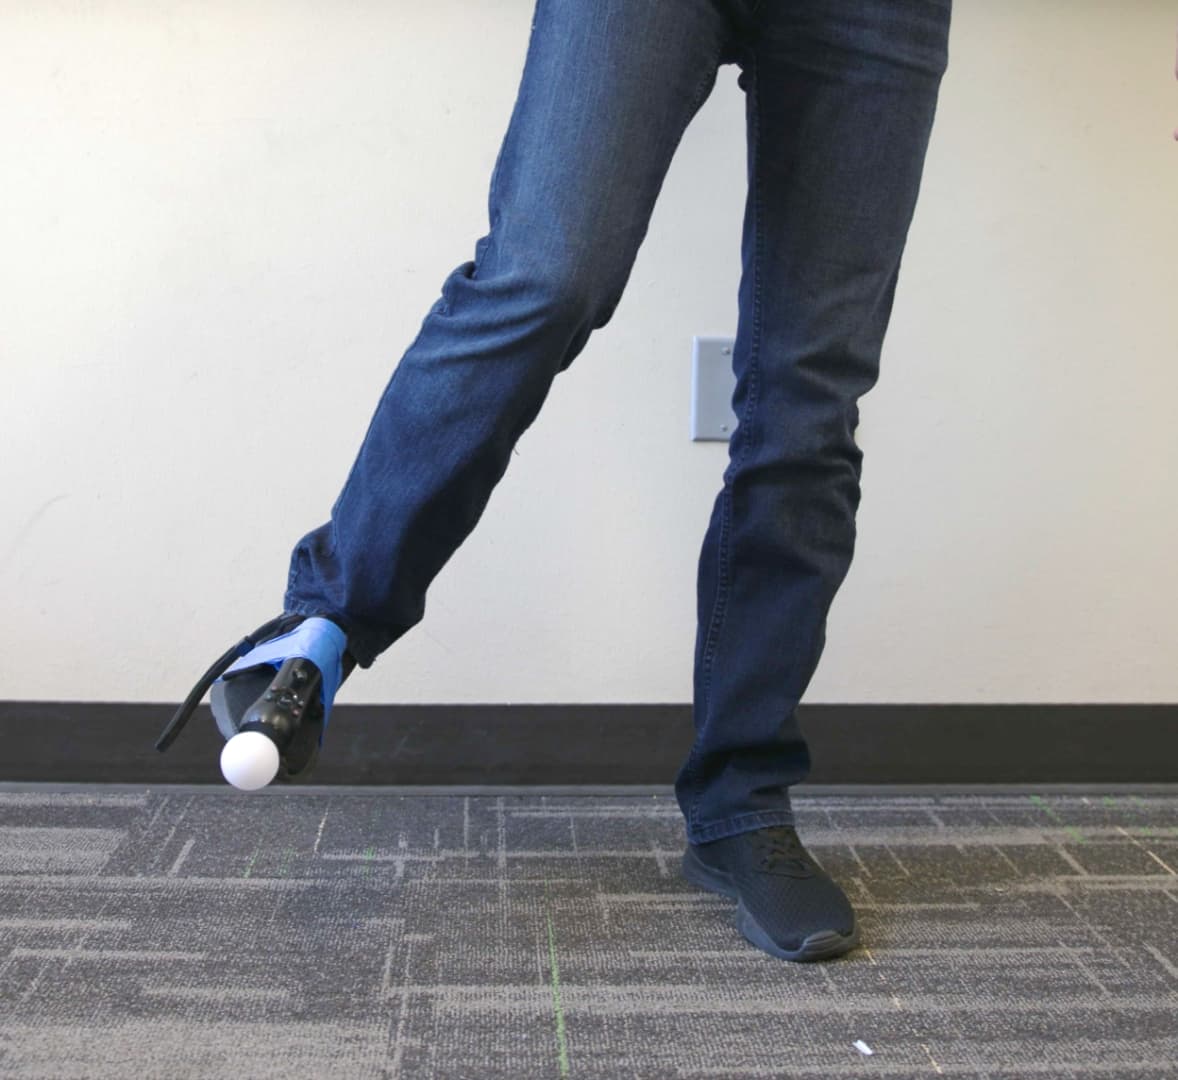 A foot wearing a shoe with a PlayStation Move motion controller taped to it. The leg is being swung to the user's right.